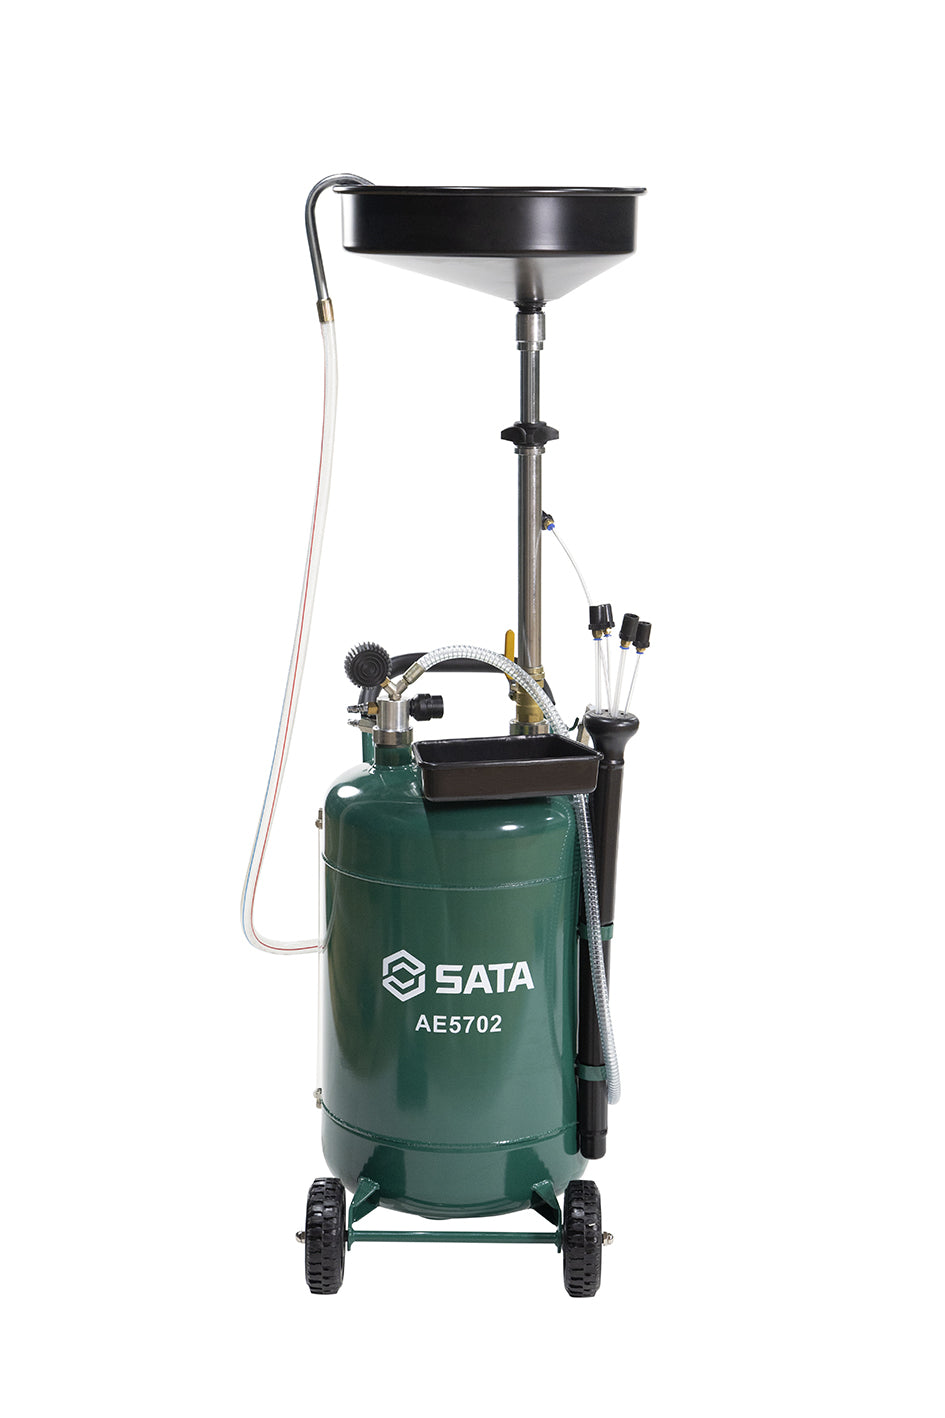 SATA AE5702 WASTE OIL COLLECTOR / WASTE OIL PUMP / WASTE OIL DRAINER / ENGINE OIL EXTRACTOR / TONG MINYAK HITAM